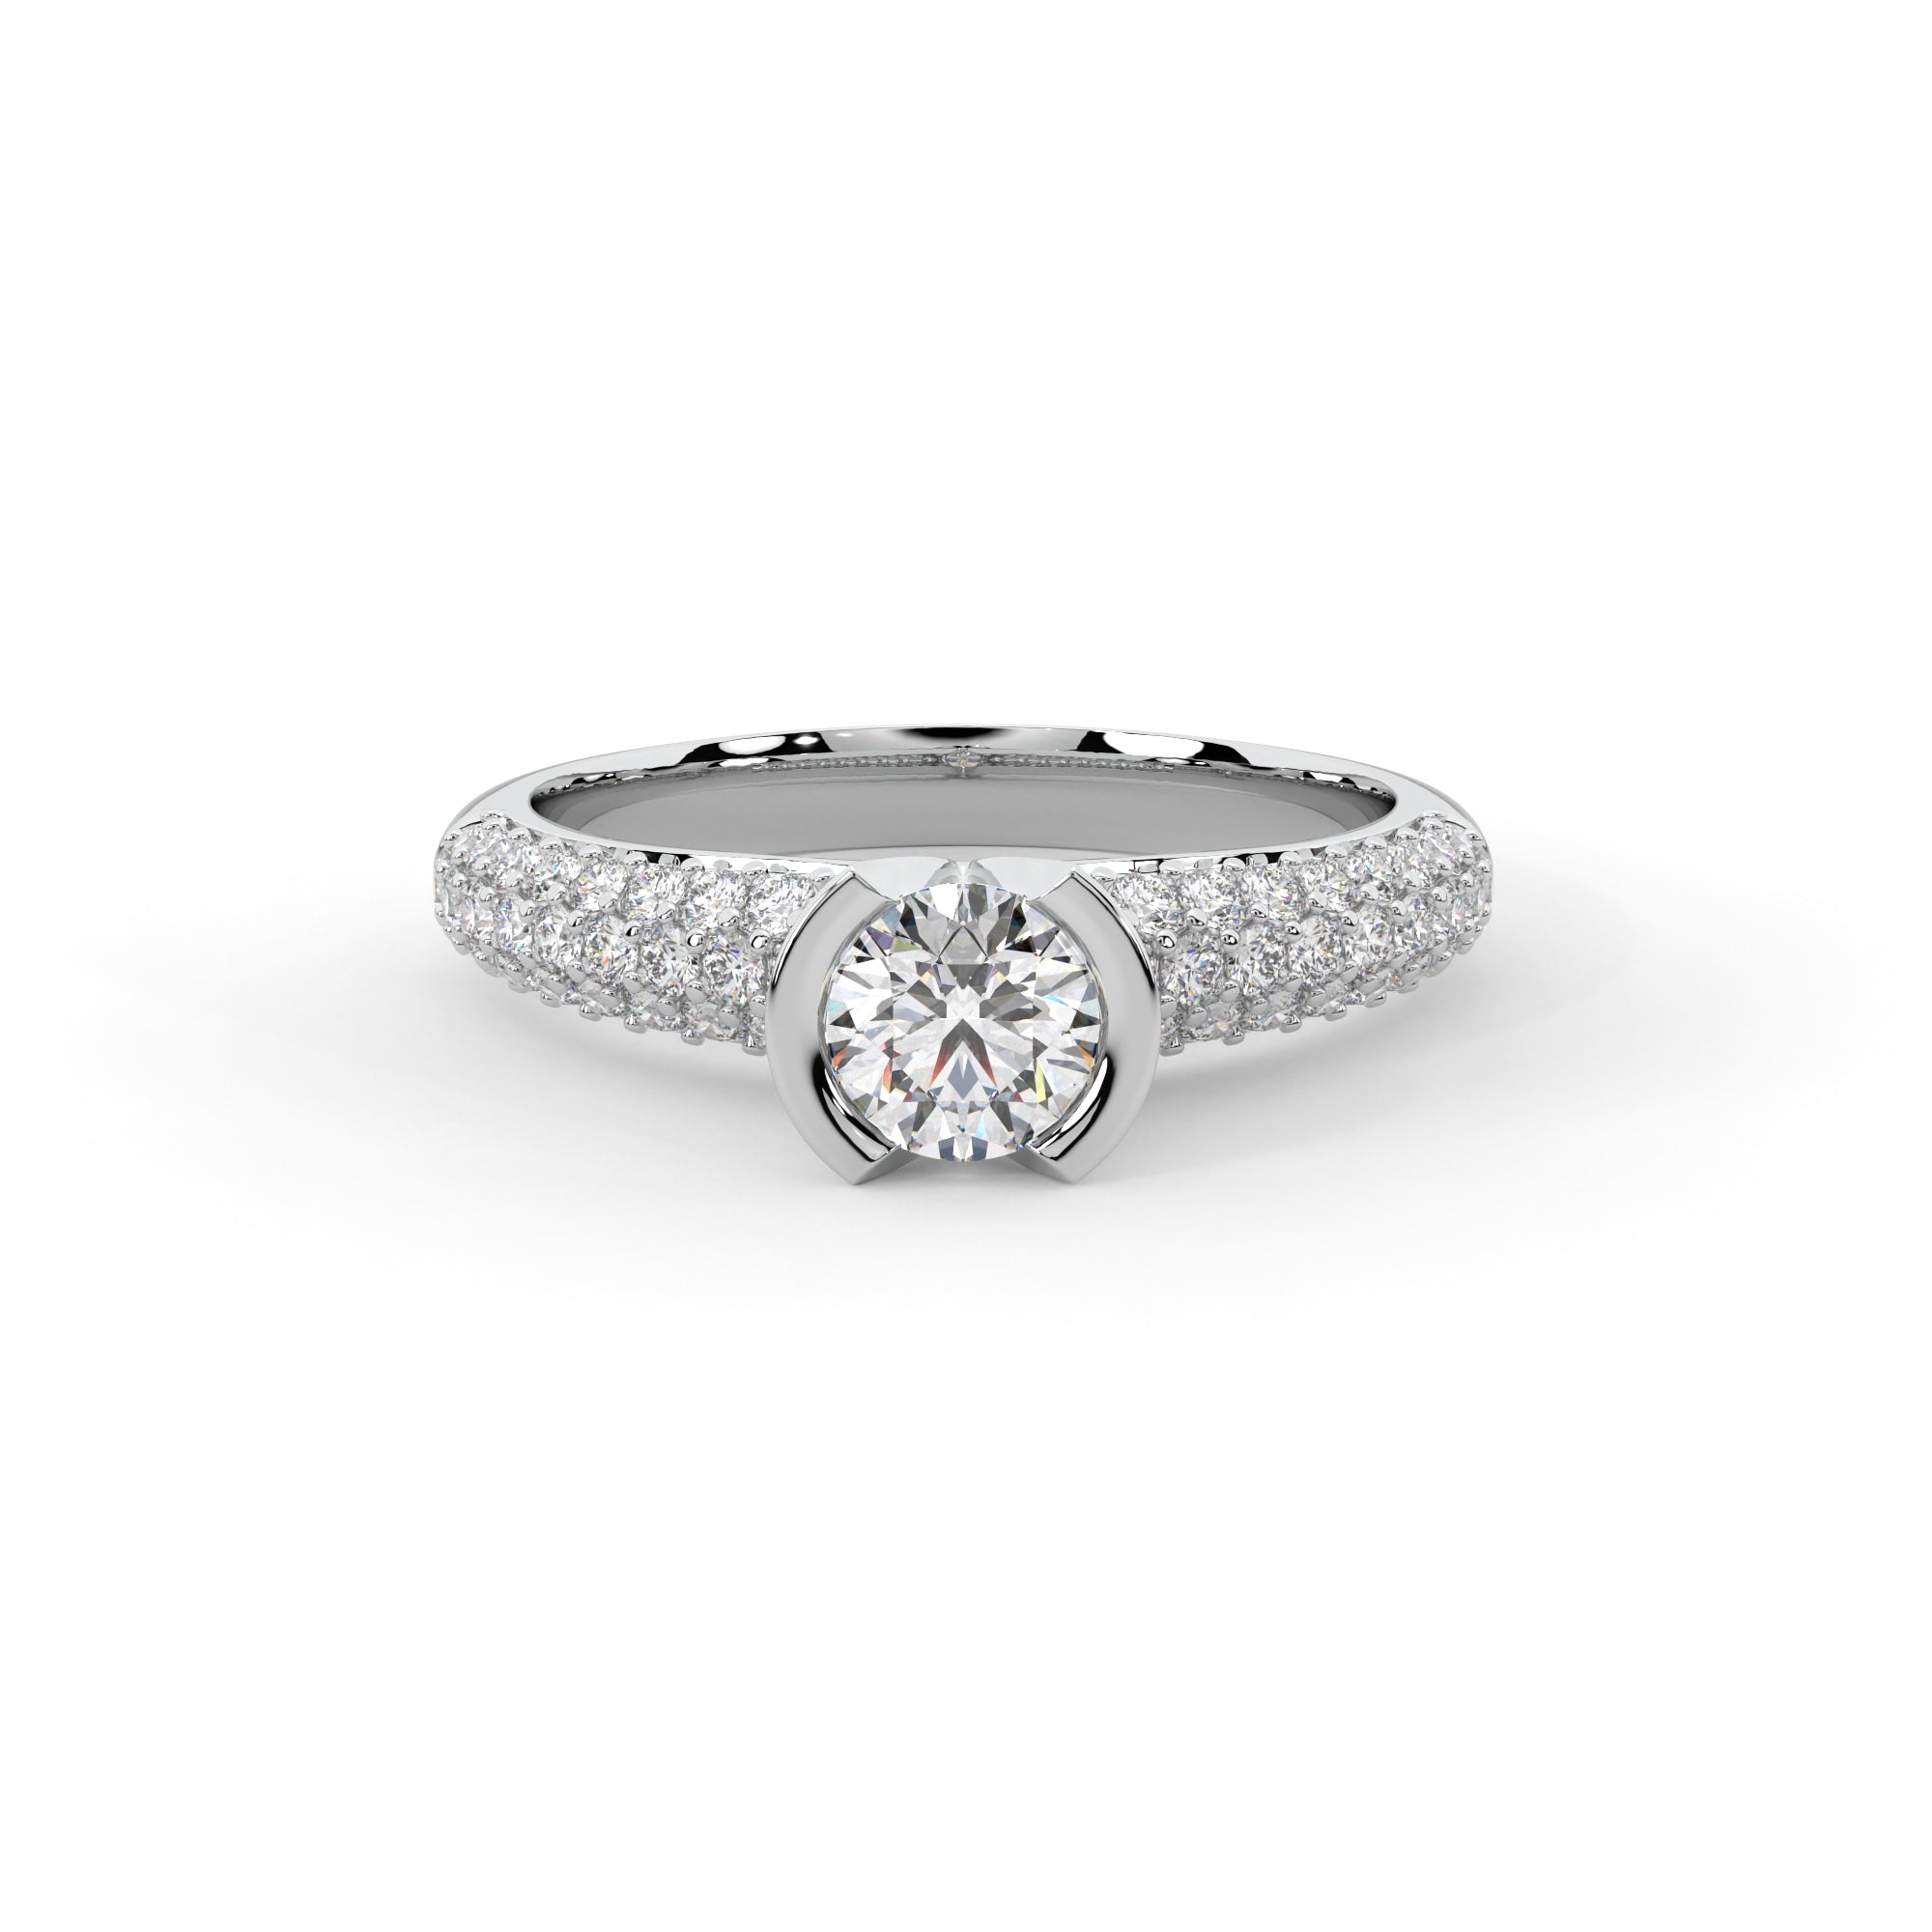 Dreamy Solitaire Ring